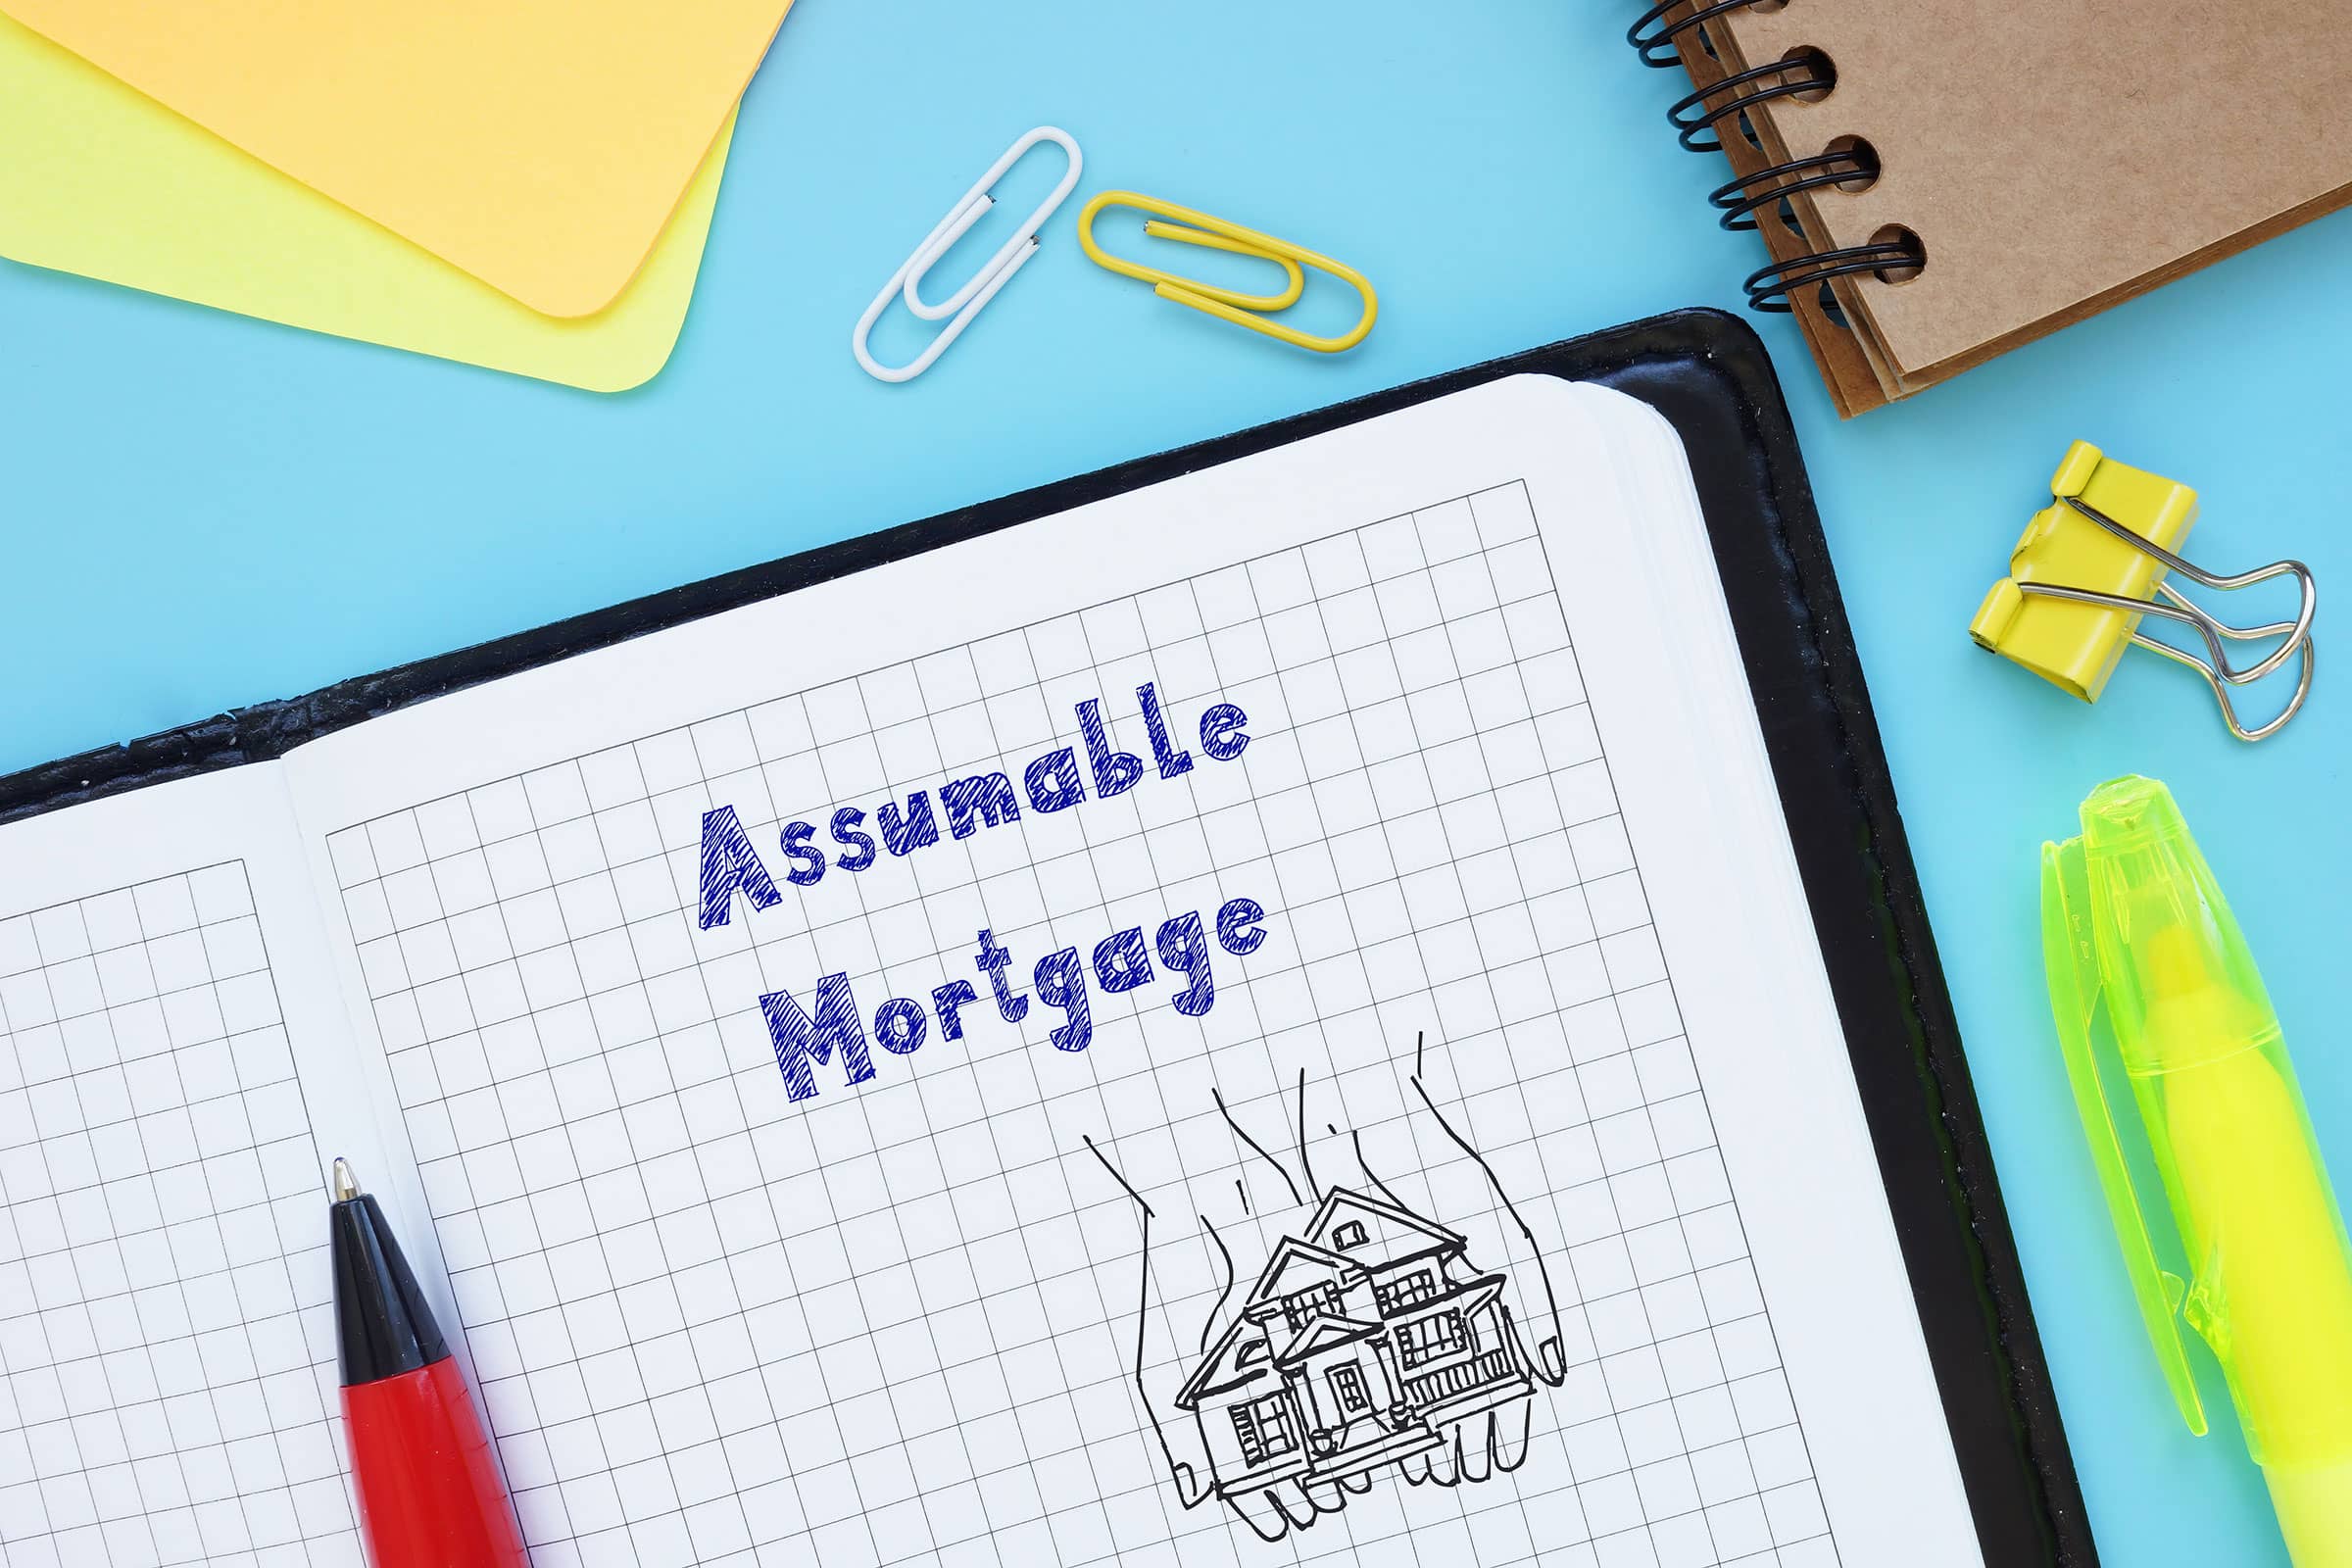 Assumable Mortgages: The Future of Home Financing in 2023 and Beyond